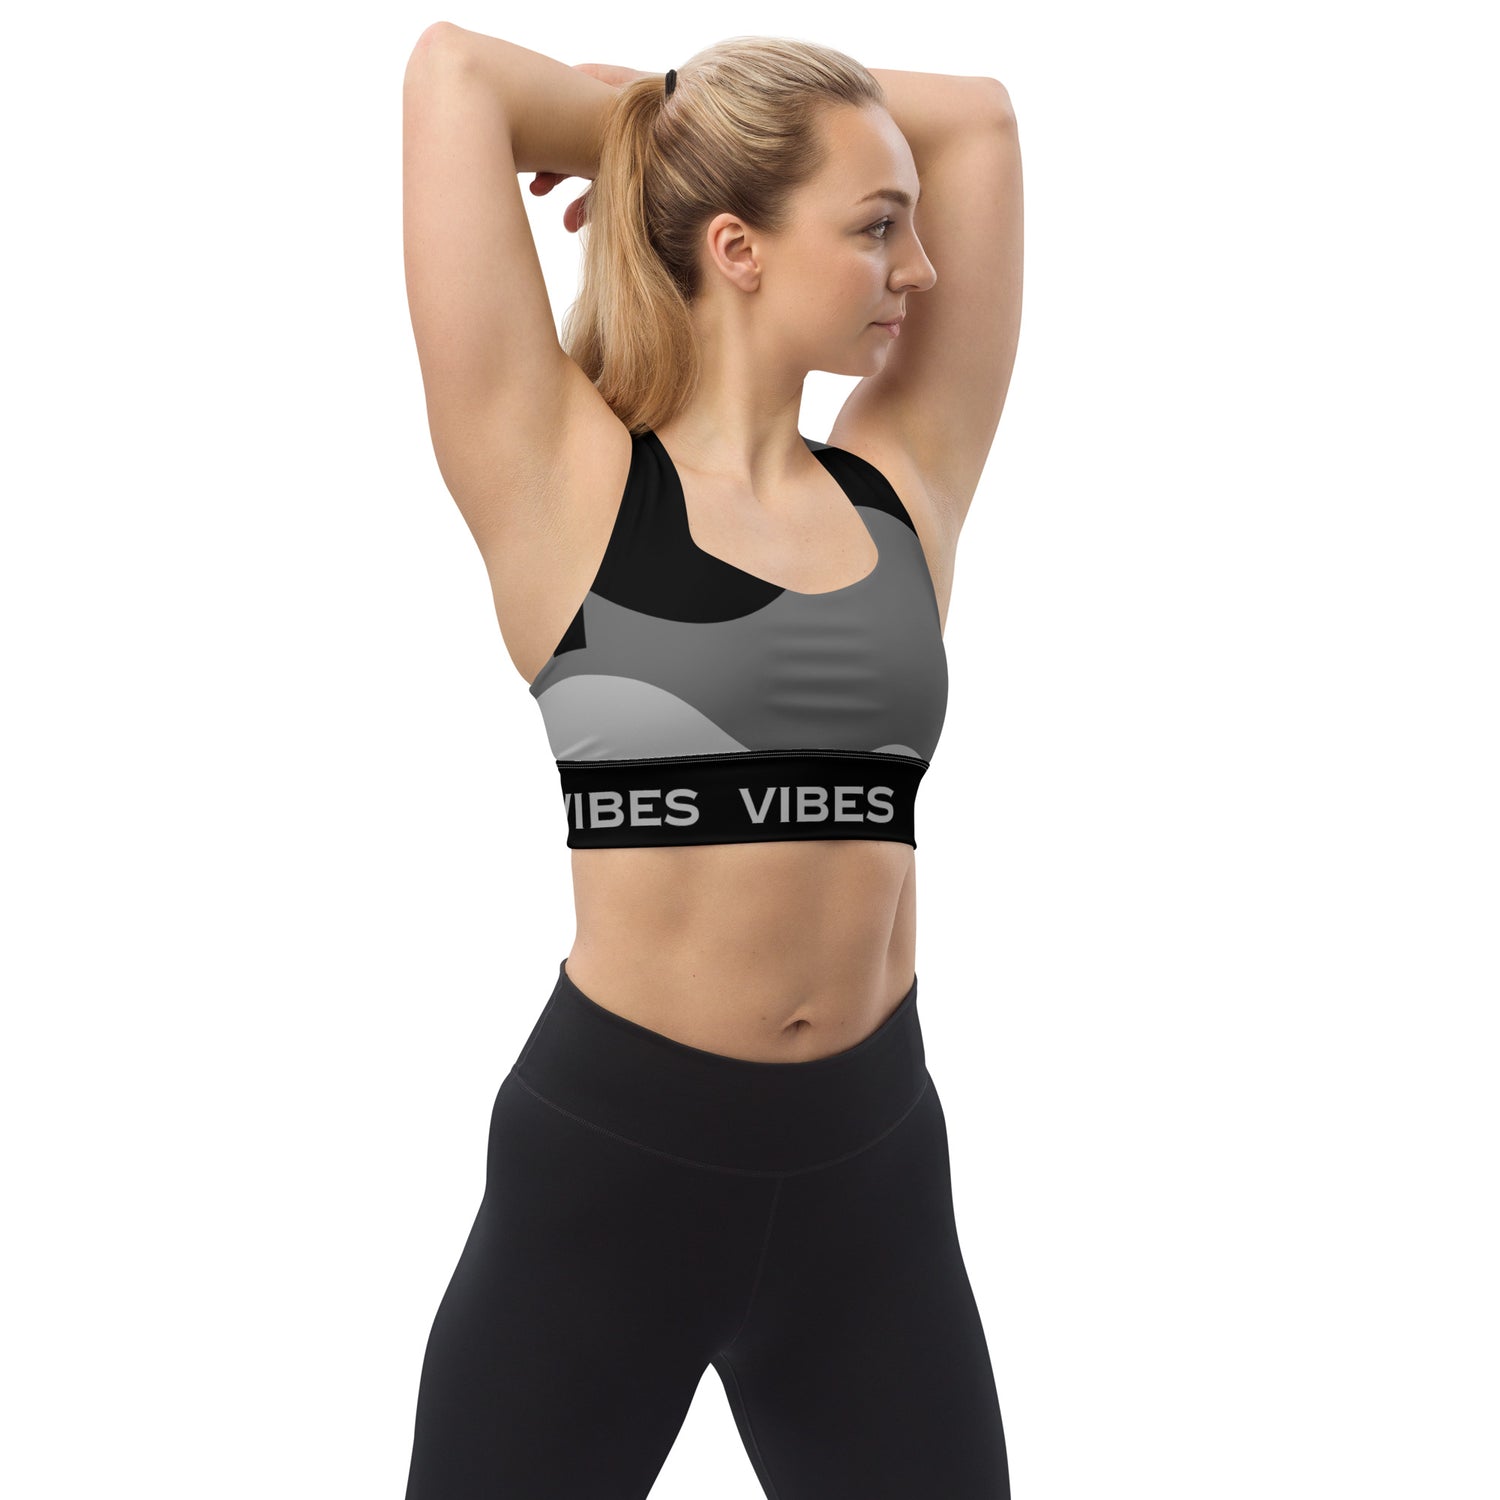 TIME OF VIBES TOV Langer Sport-BH ABSTRACT (Grau) - €49,00